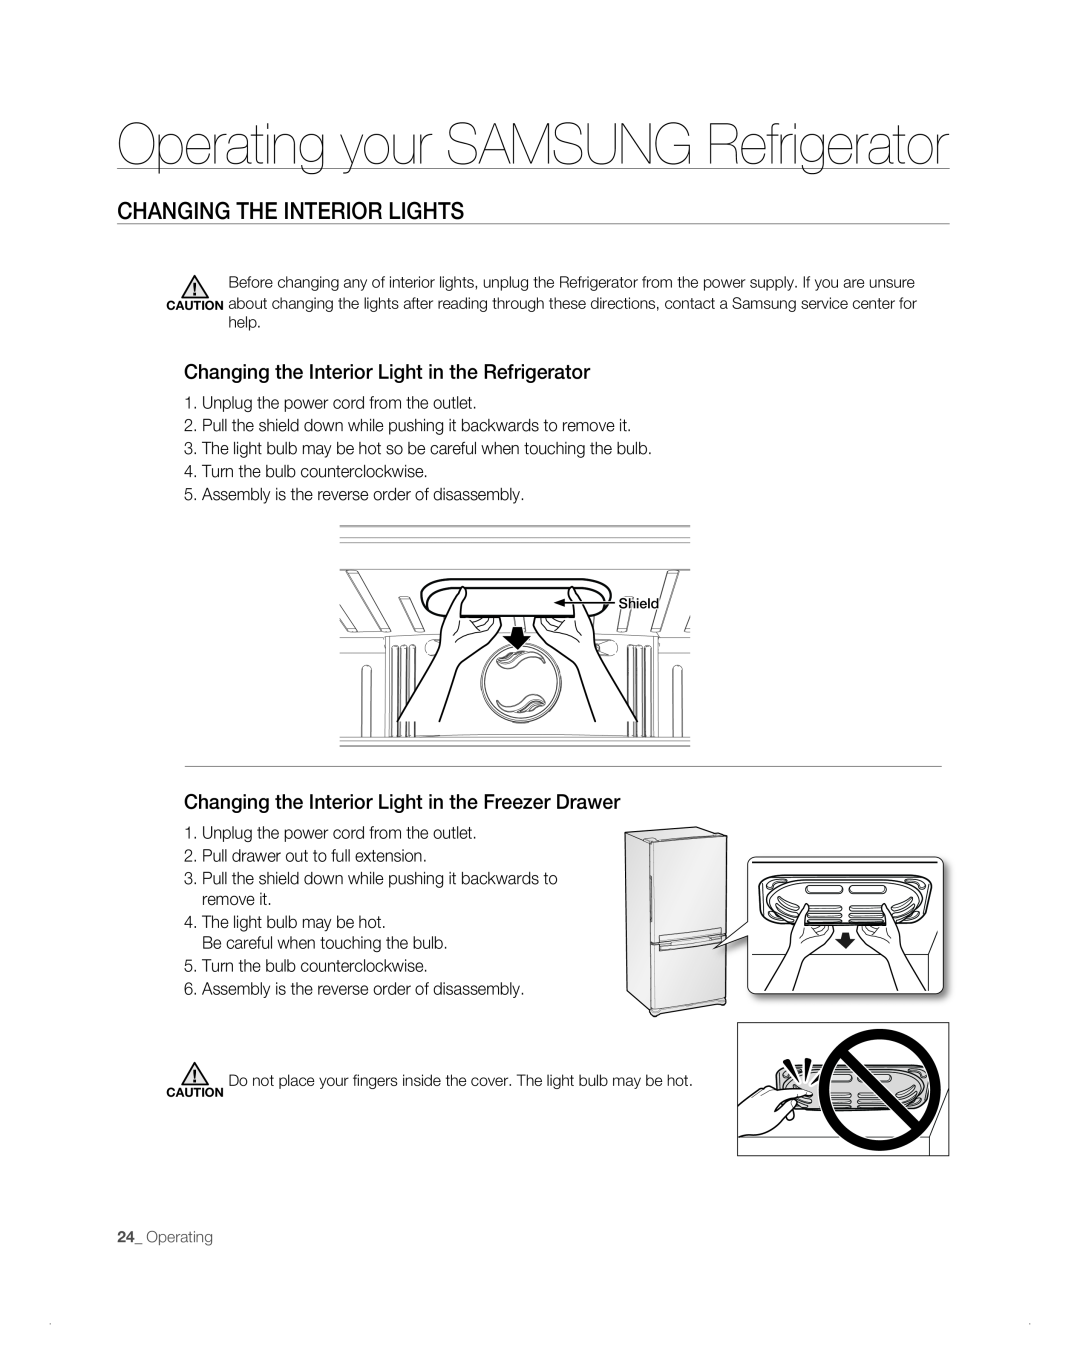 Samsung RB196AB, RB194AB, RB216AB, RB1AB, RB214AB user manual CHANGING THE INTERIOR LigHtS, Operating your SAMSUNG Refrigerator 